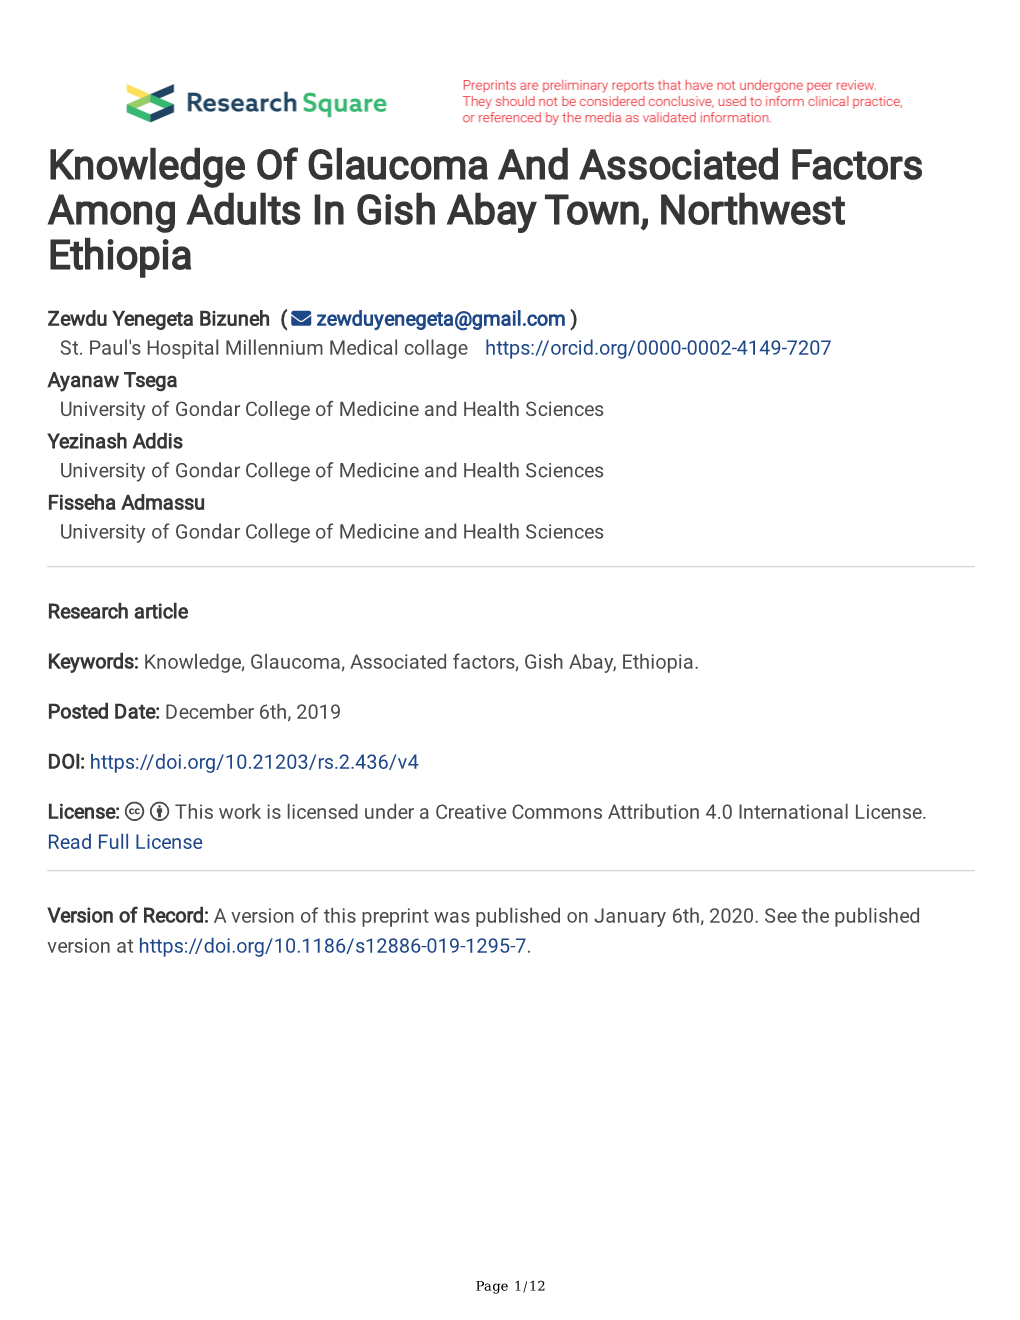 Knowledge of Glaucoma and Associated Factors Among Adults in Gish Abay Town, Northwest Ethiopia